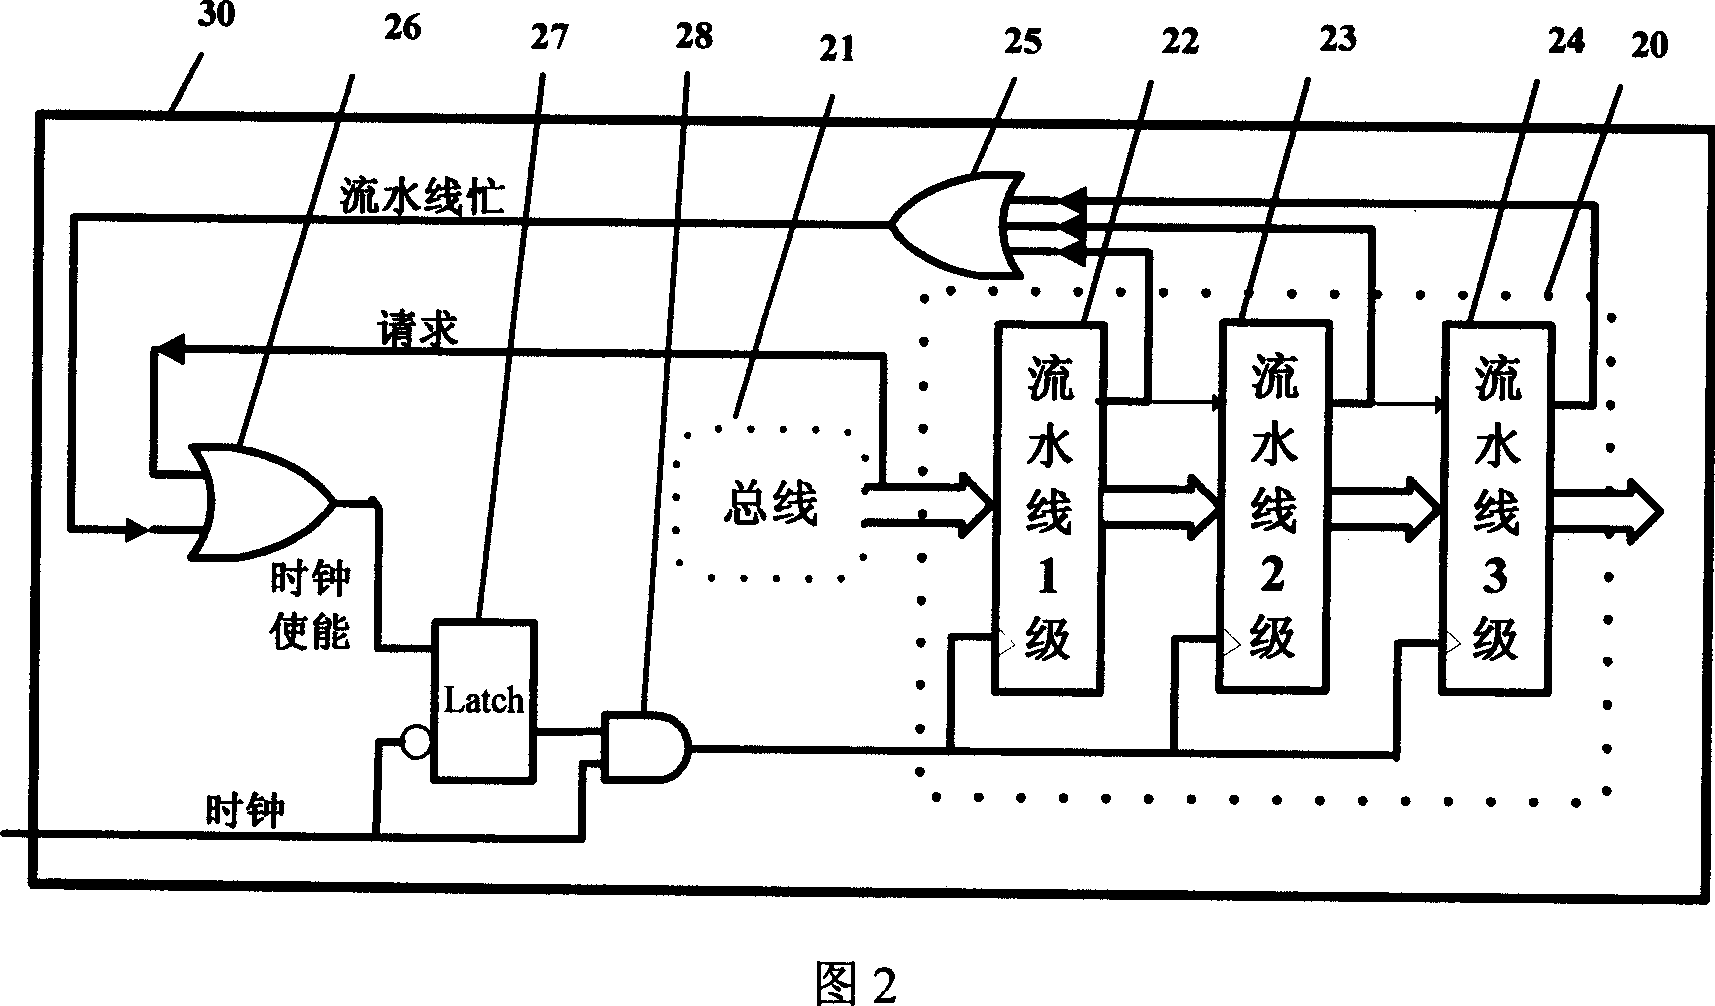 Power consumption reduction method for intellectual core and functional module for chip system